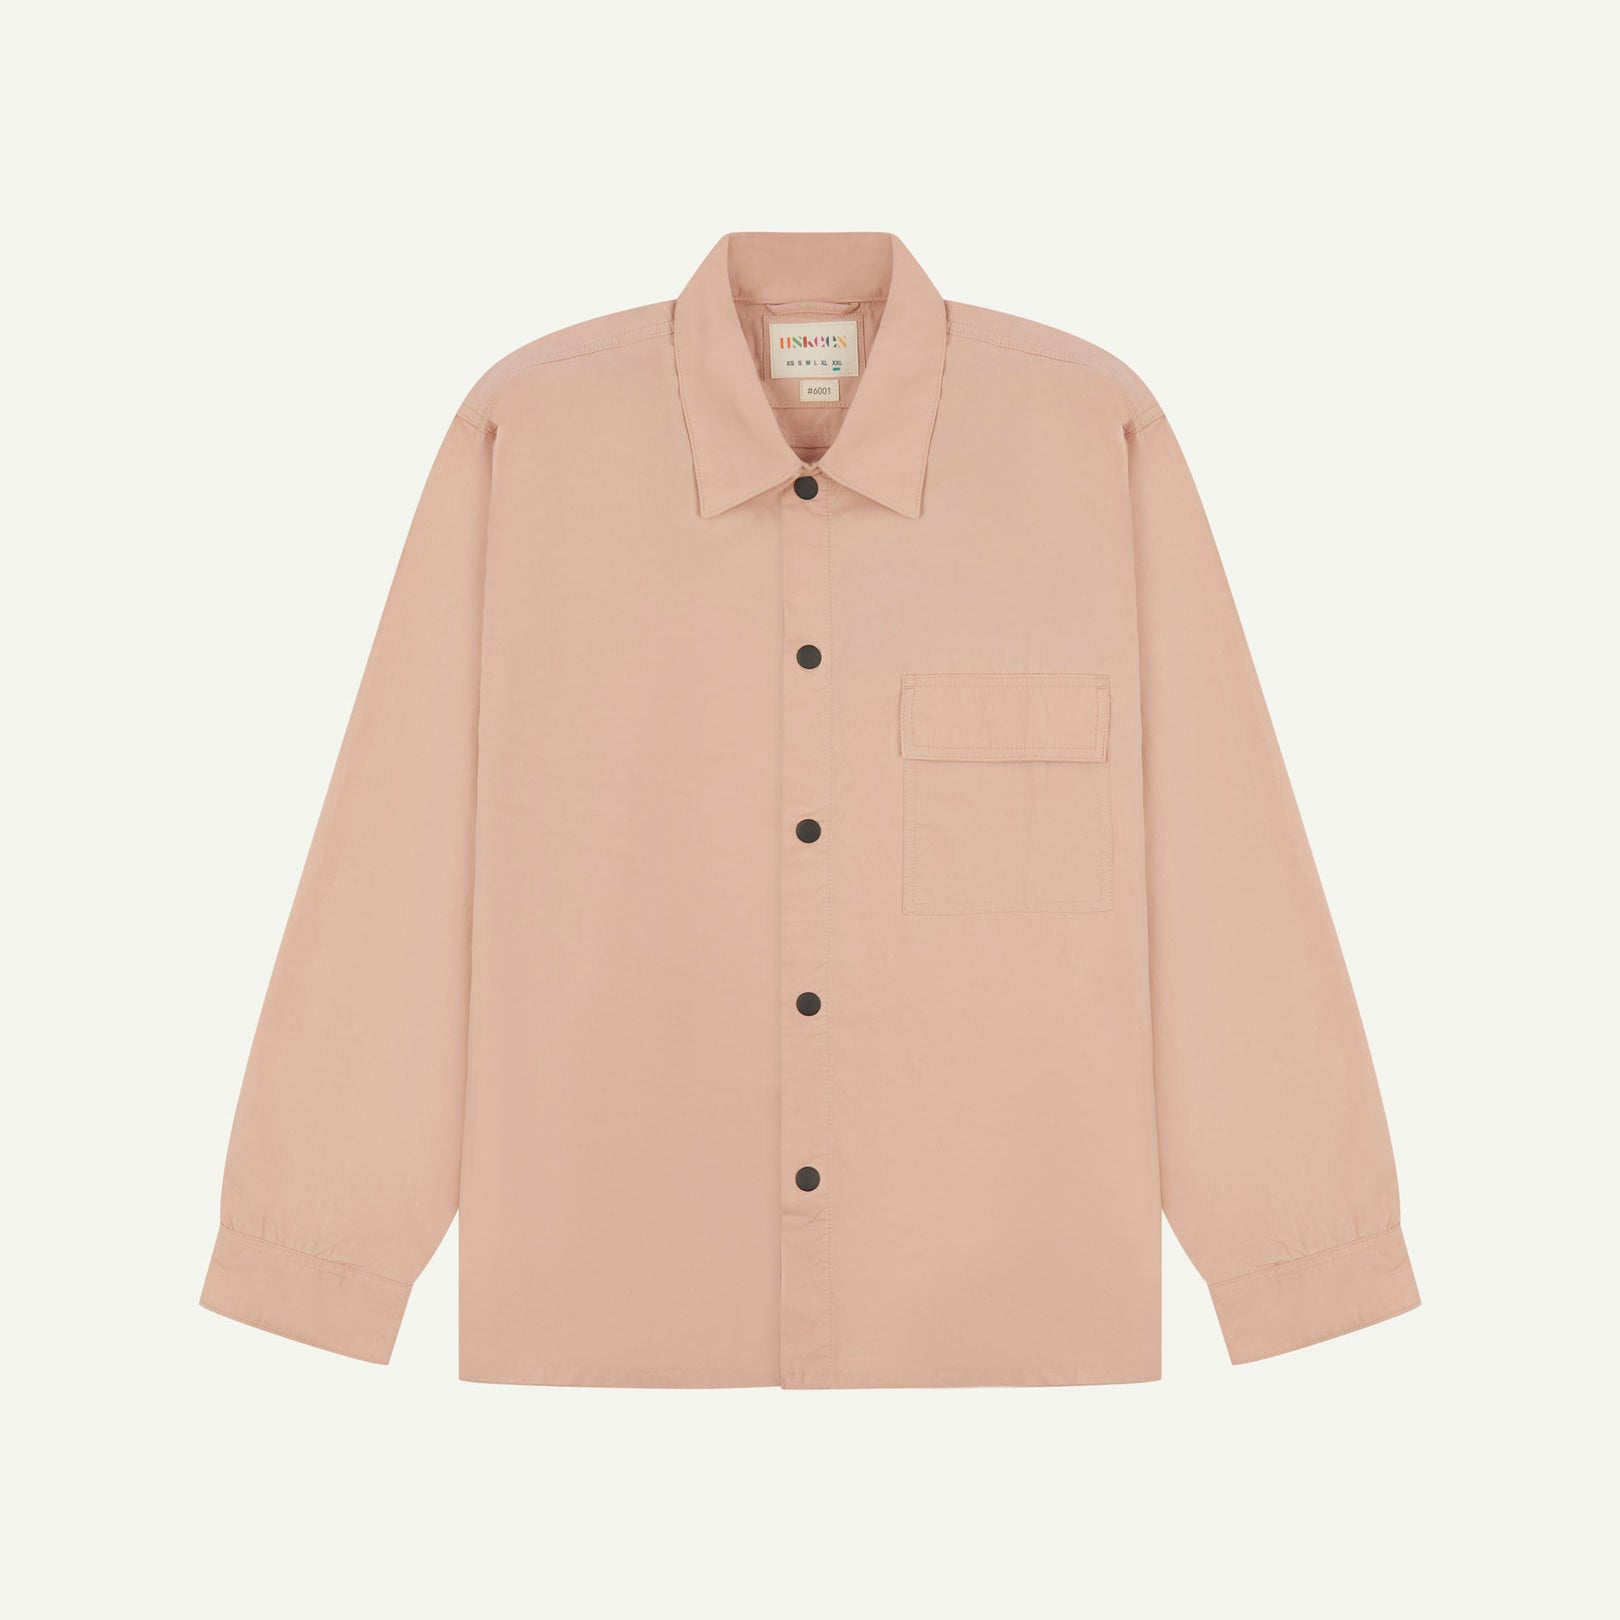 Front flat view of dusty pink, lightweight overshirt. Clear view of the press studs, breast pocket and Uskees branding label.